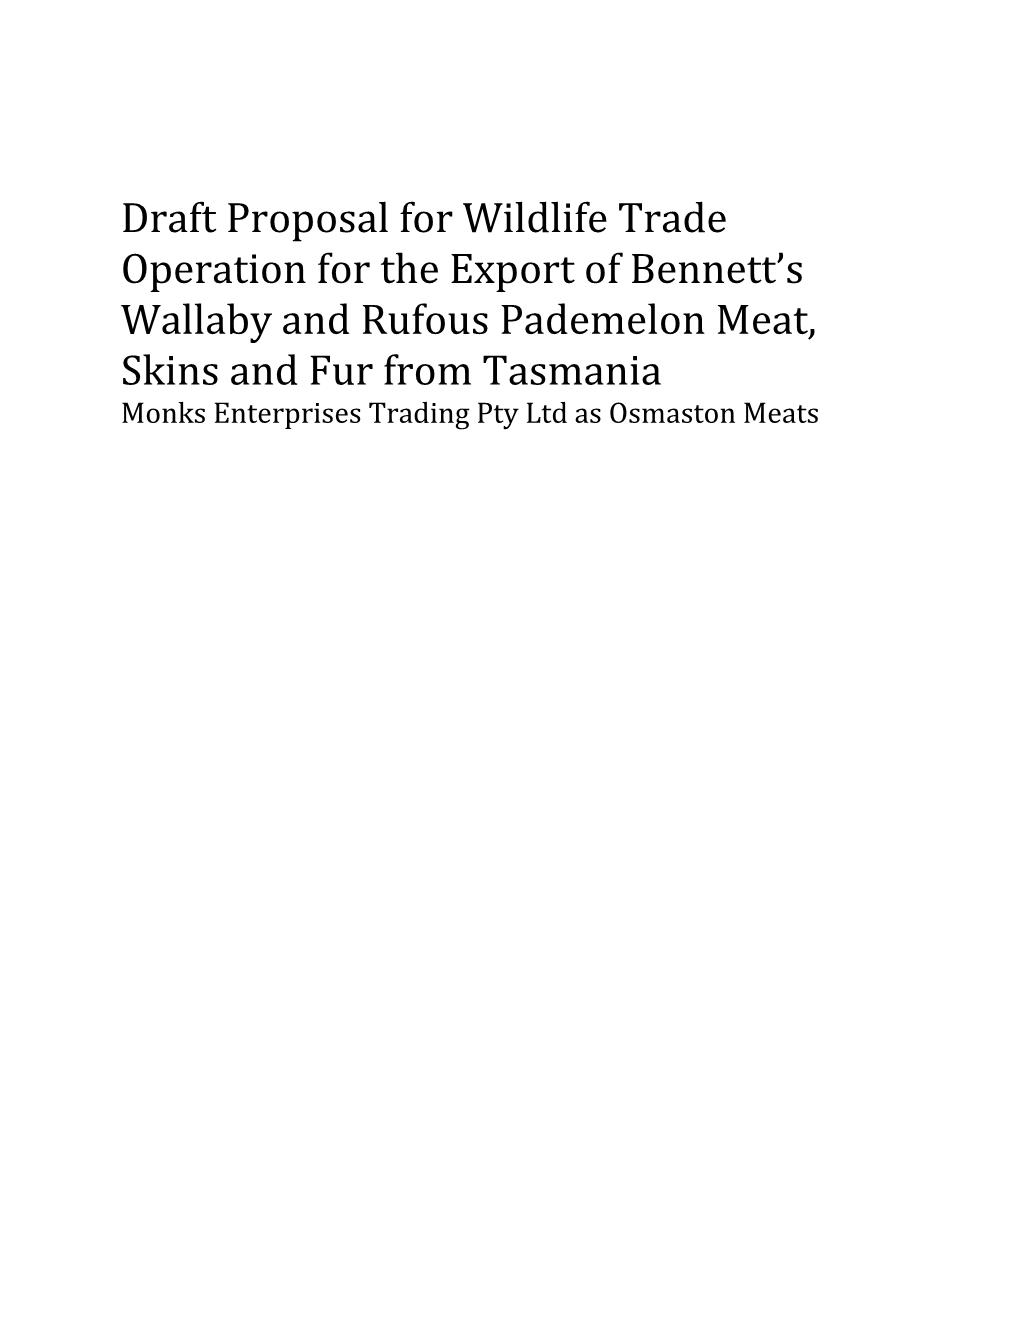 Draft Proposal for Wildlife Trade Operation for the Export of Bennett S Wallaby and Rufous